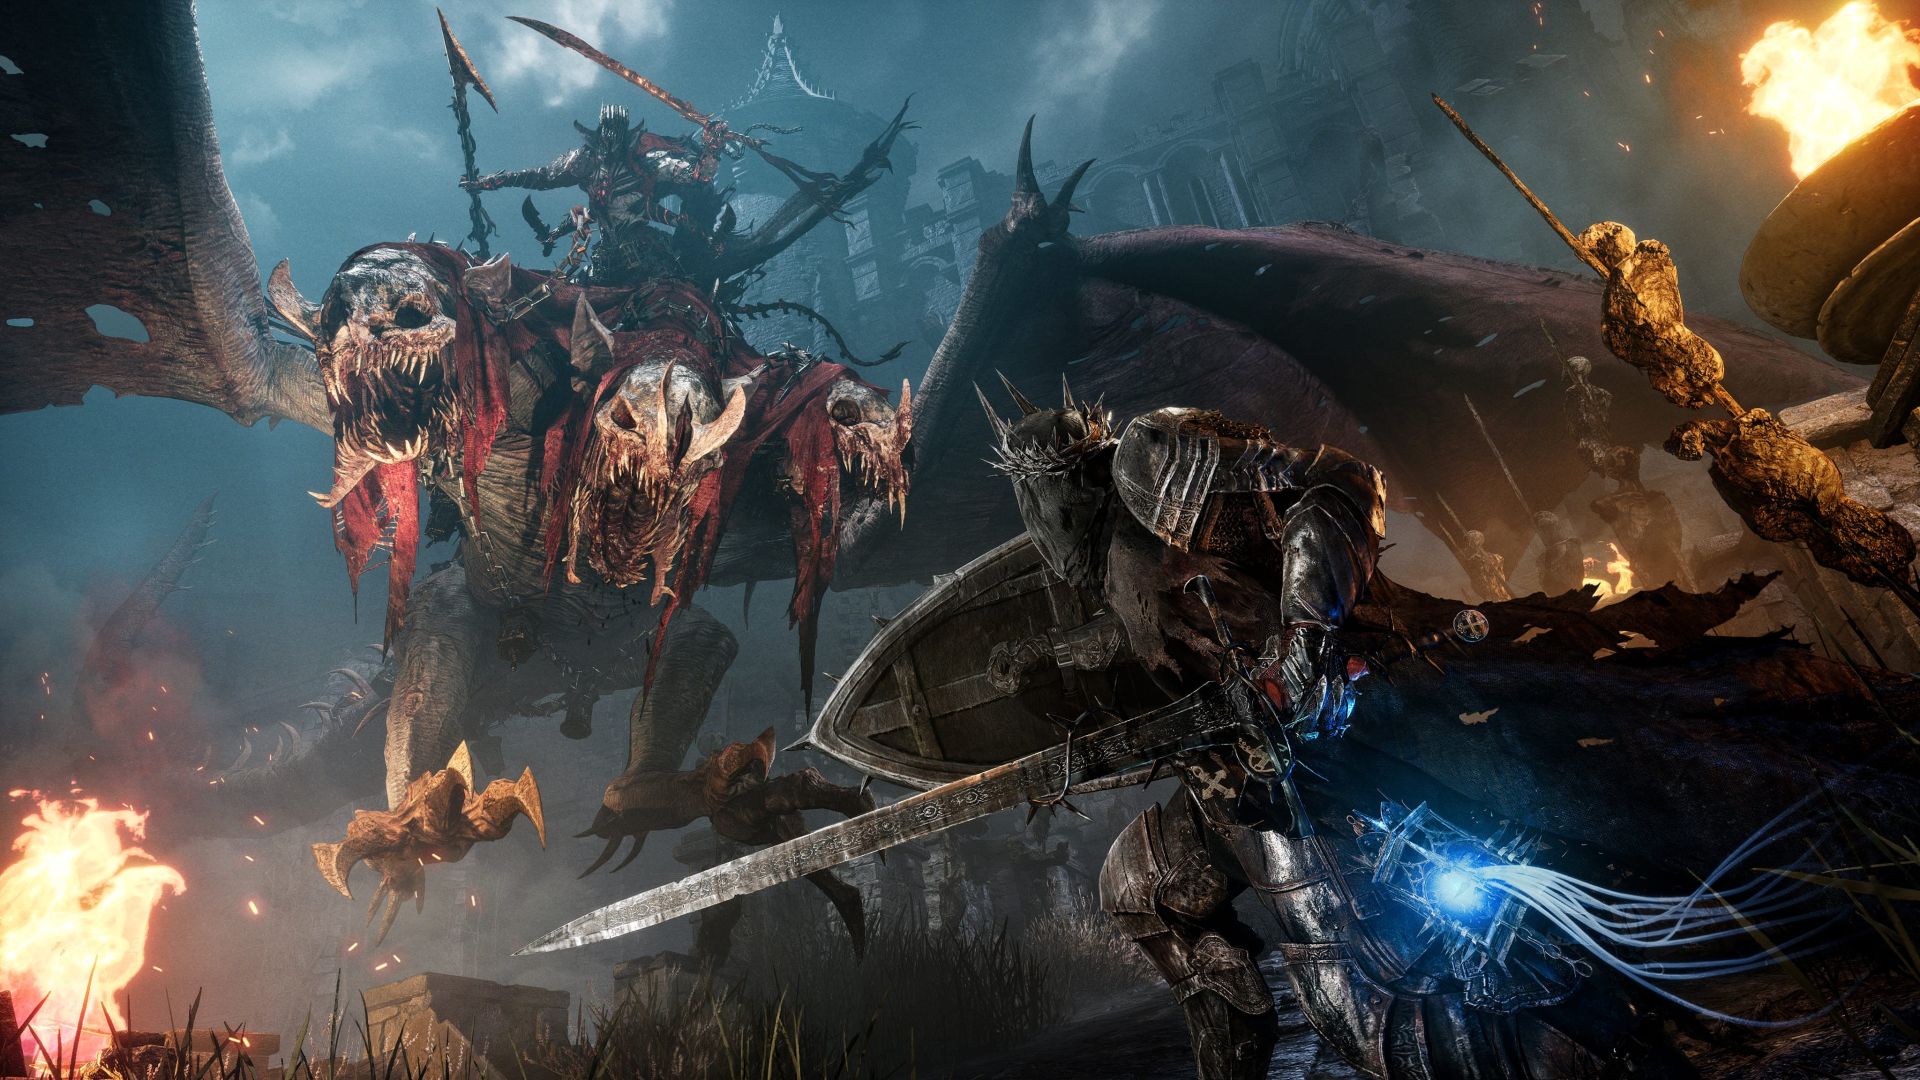 Lords of the Fallen PC Requirements Revealed, SSD Required for Recommended Specs